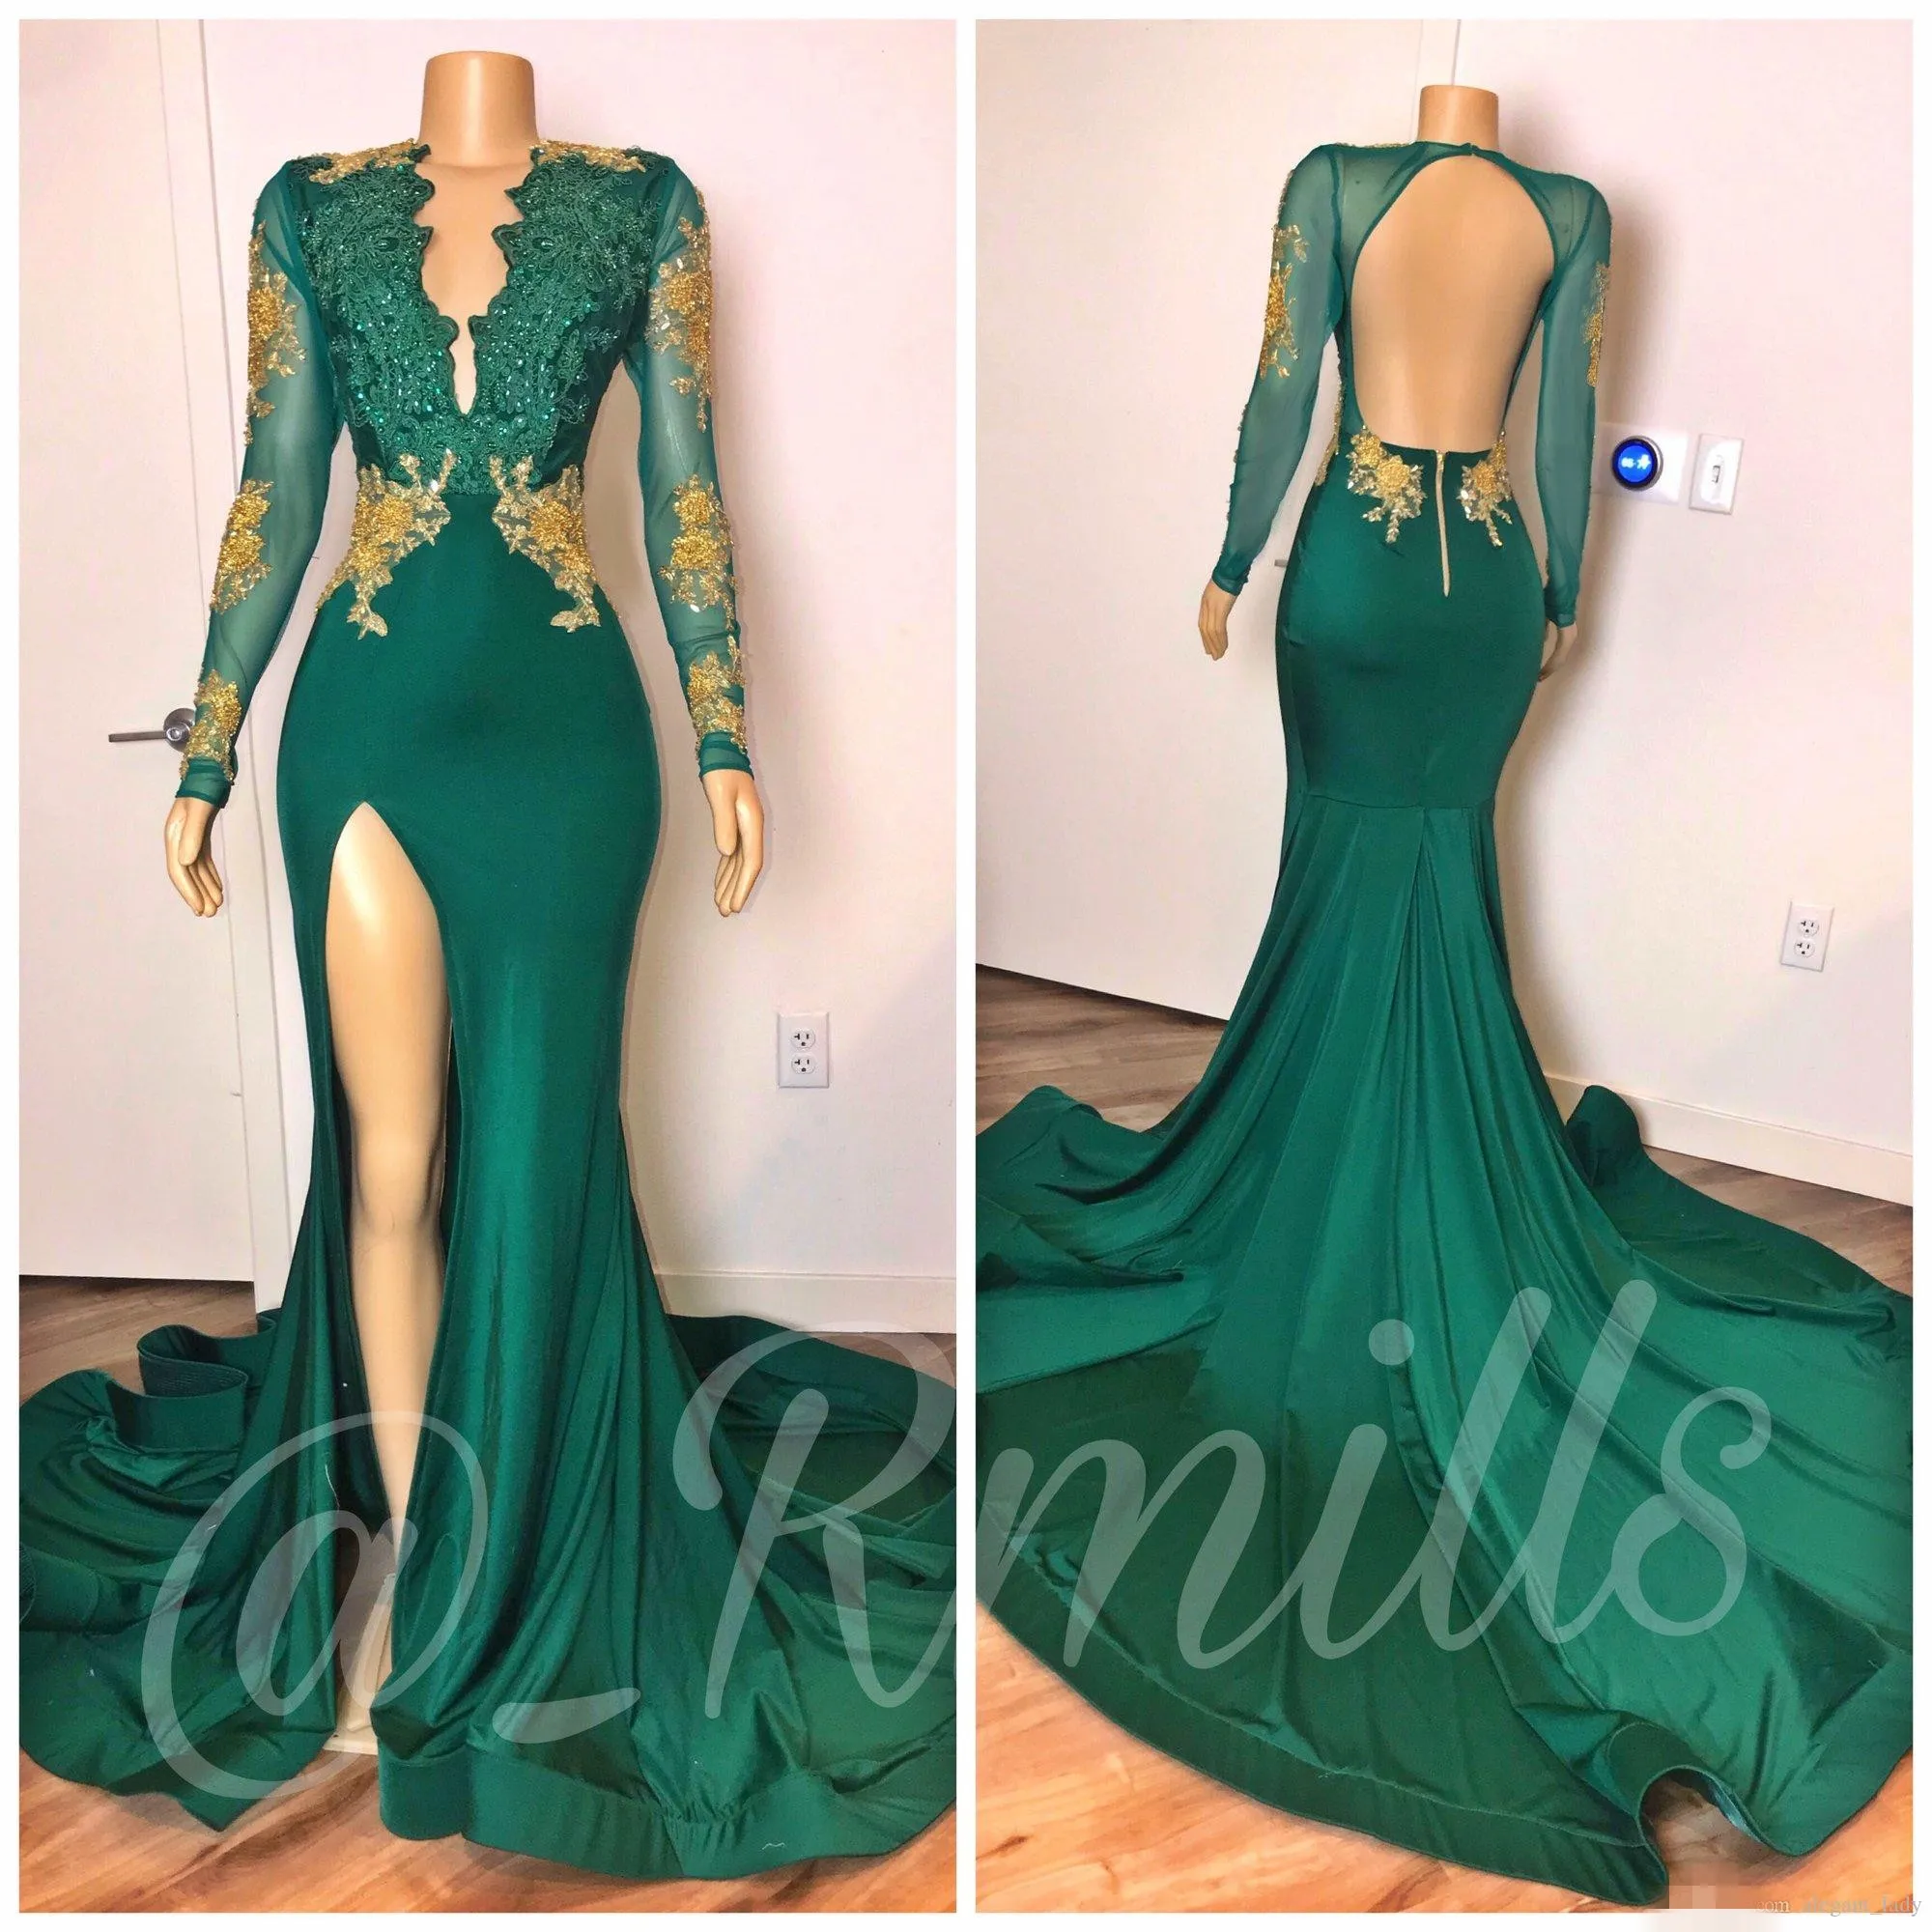 Sleeves Green Long Prom Dresses Mermaid Plunging V Gold Applique Sexy Backless Illusion Sheer Neck Side Slit Evening Gowns 0420